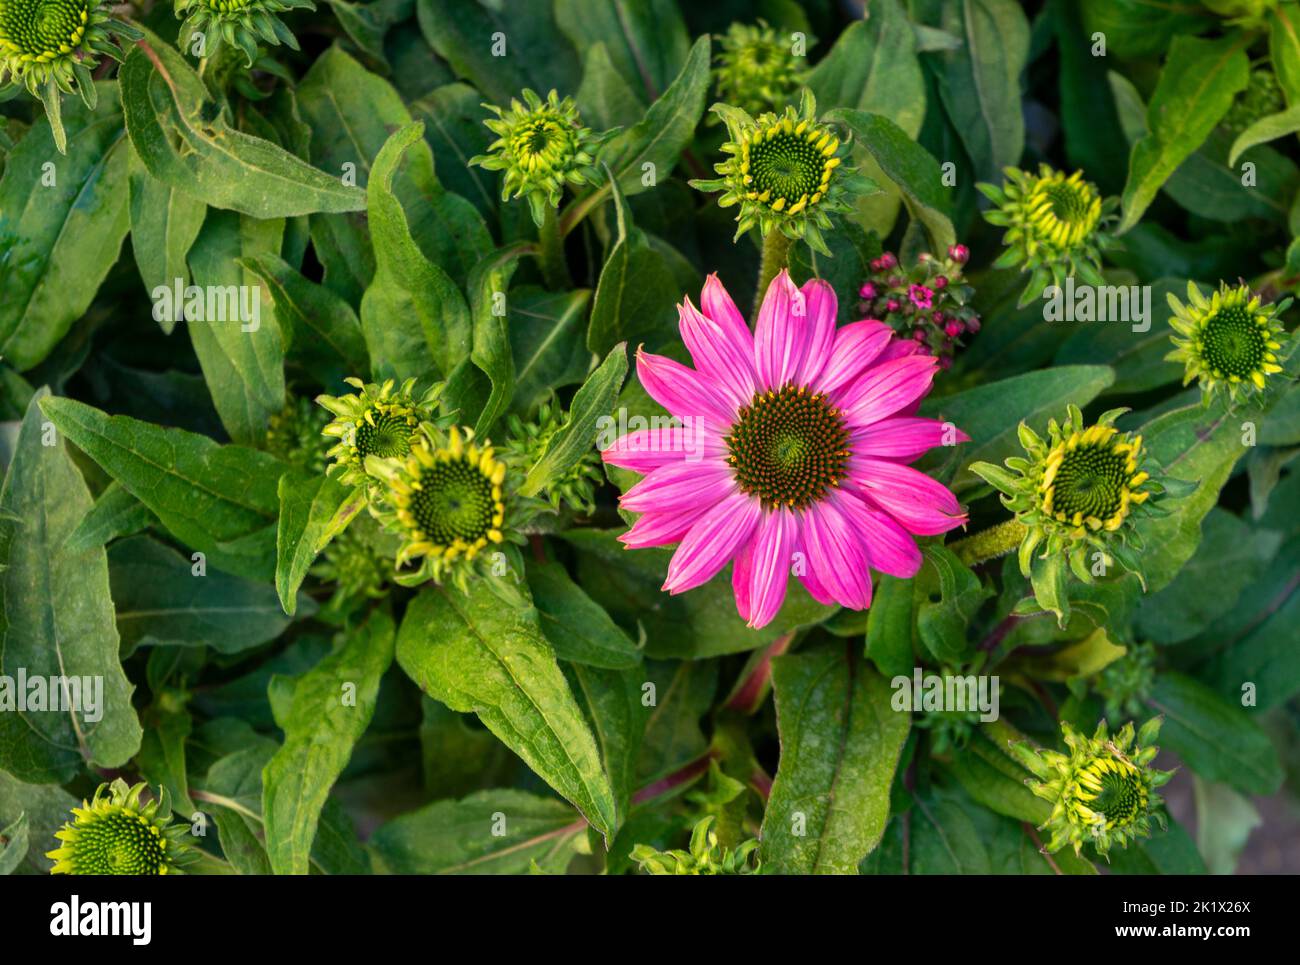 Purple coneflower in natural green ambiance seen from above Stock Photo